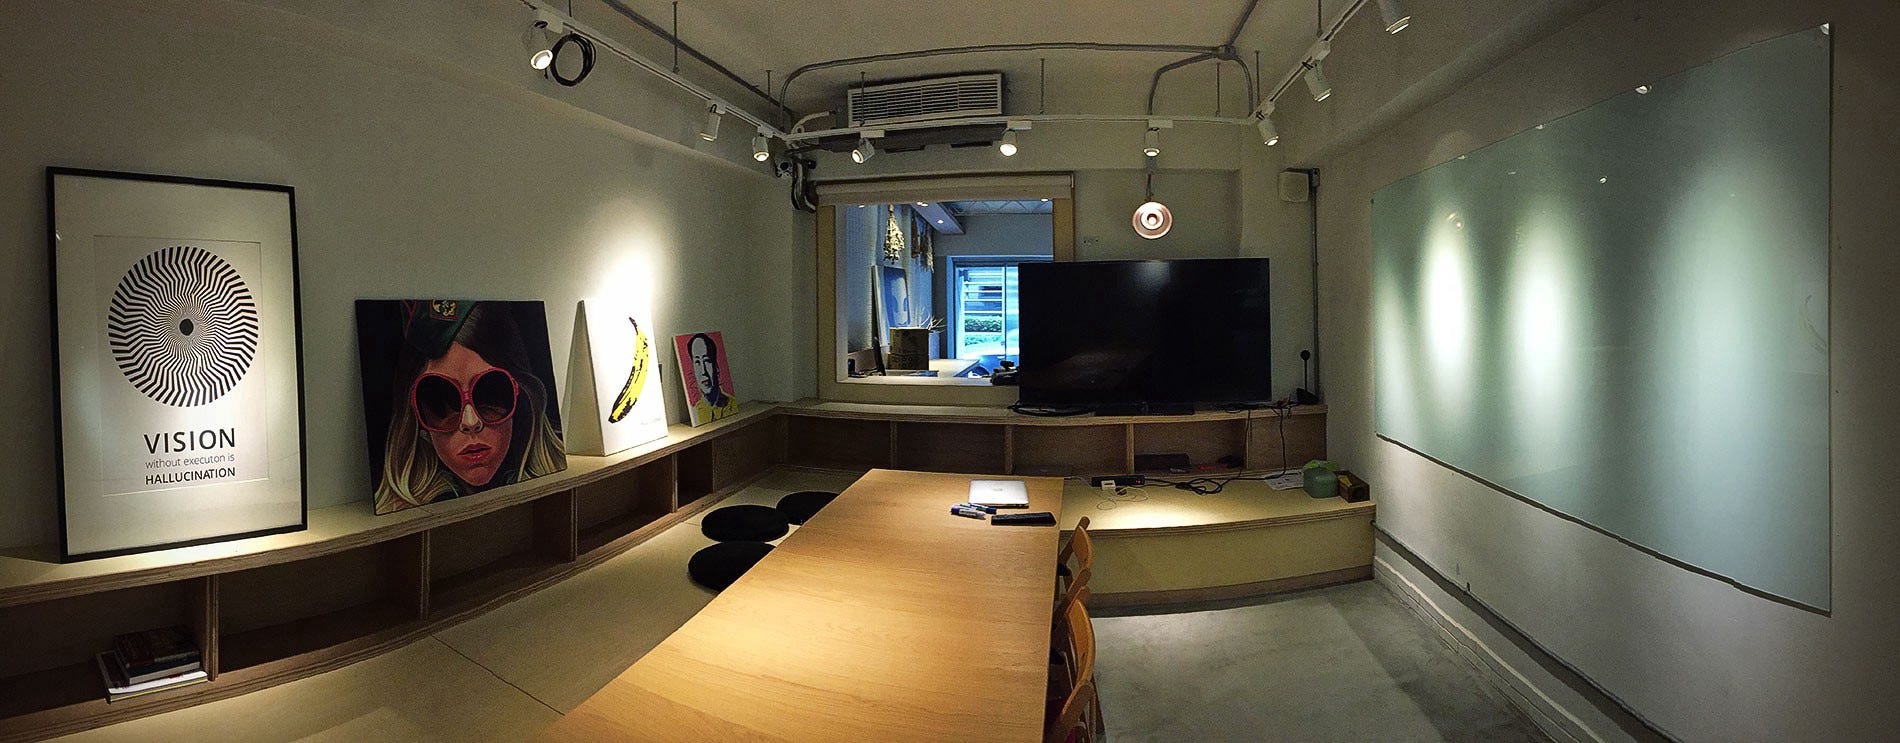 Tenten’s Taipei office is located across from Breeze Center in the Eastern District. It is a café sort of office with a capacity of up to 40 people. I hope it would be more than just an office, but a co-working space/hub with hot desks.